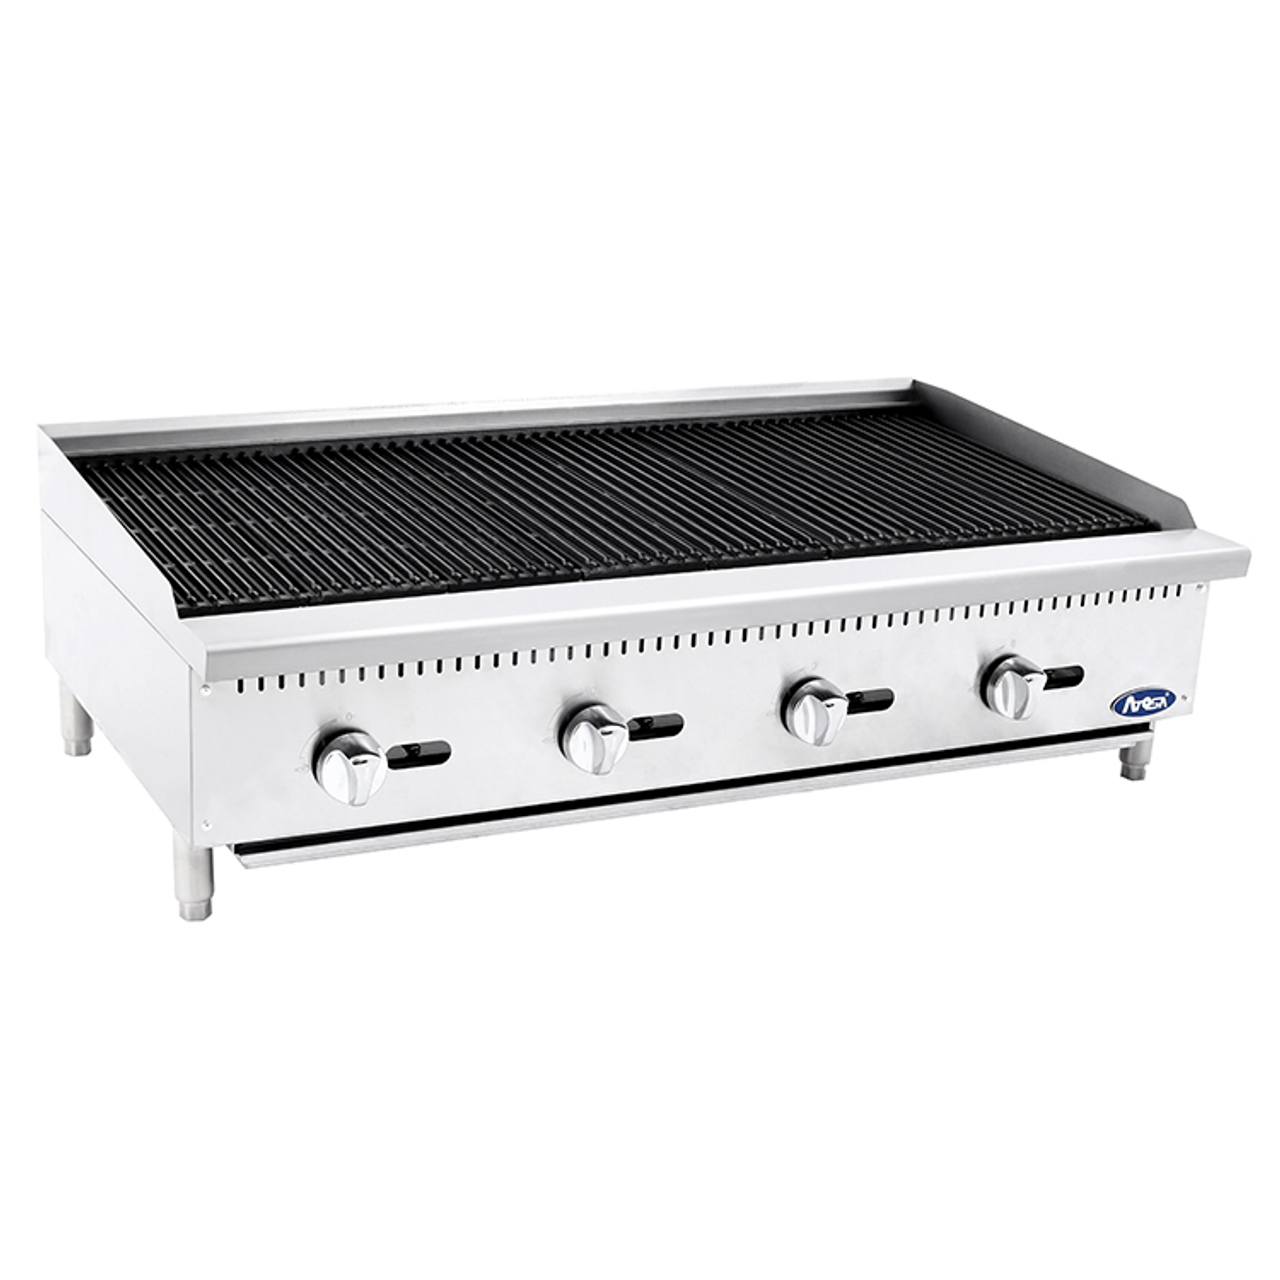 CookRite Charbroiler, Natural gas, countertop, 48"W x 27-3/5"D x 15-1/5"H (47.9"W 20.2"D cooking area), (4) stainless steel burners, standby pilots, stainless steel radiant plates, cast iron grill grates & lava rock grates, independent manual controls, adjustable multi-level top grates, stainless steel structure, adjustable stainless steel legs, 140,000 BTU, cETLus, ETL-Sanitation (ships with LP conversion kit)